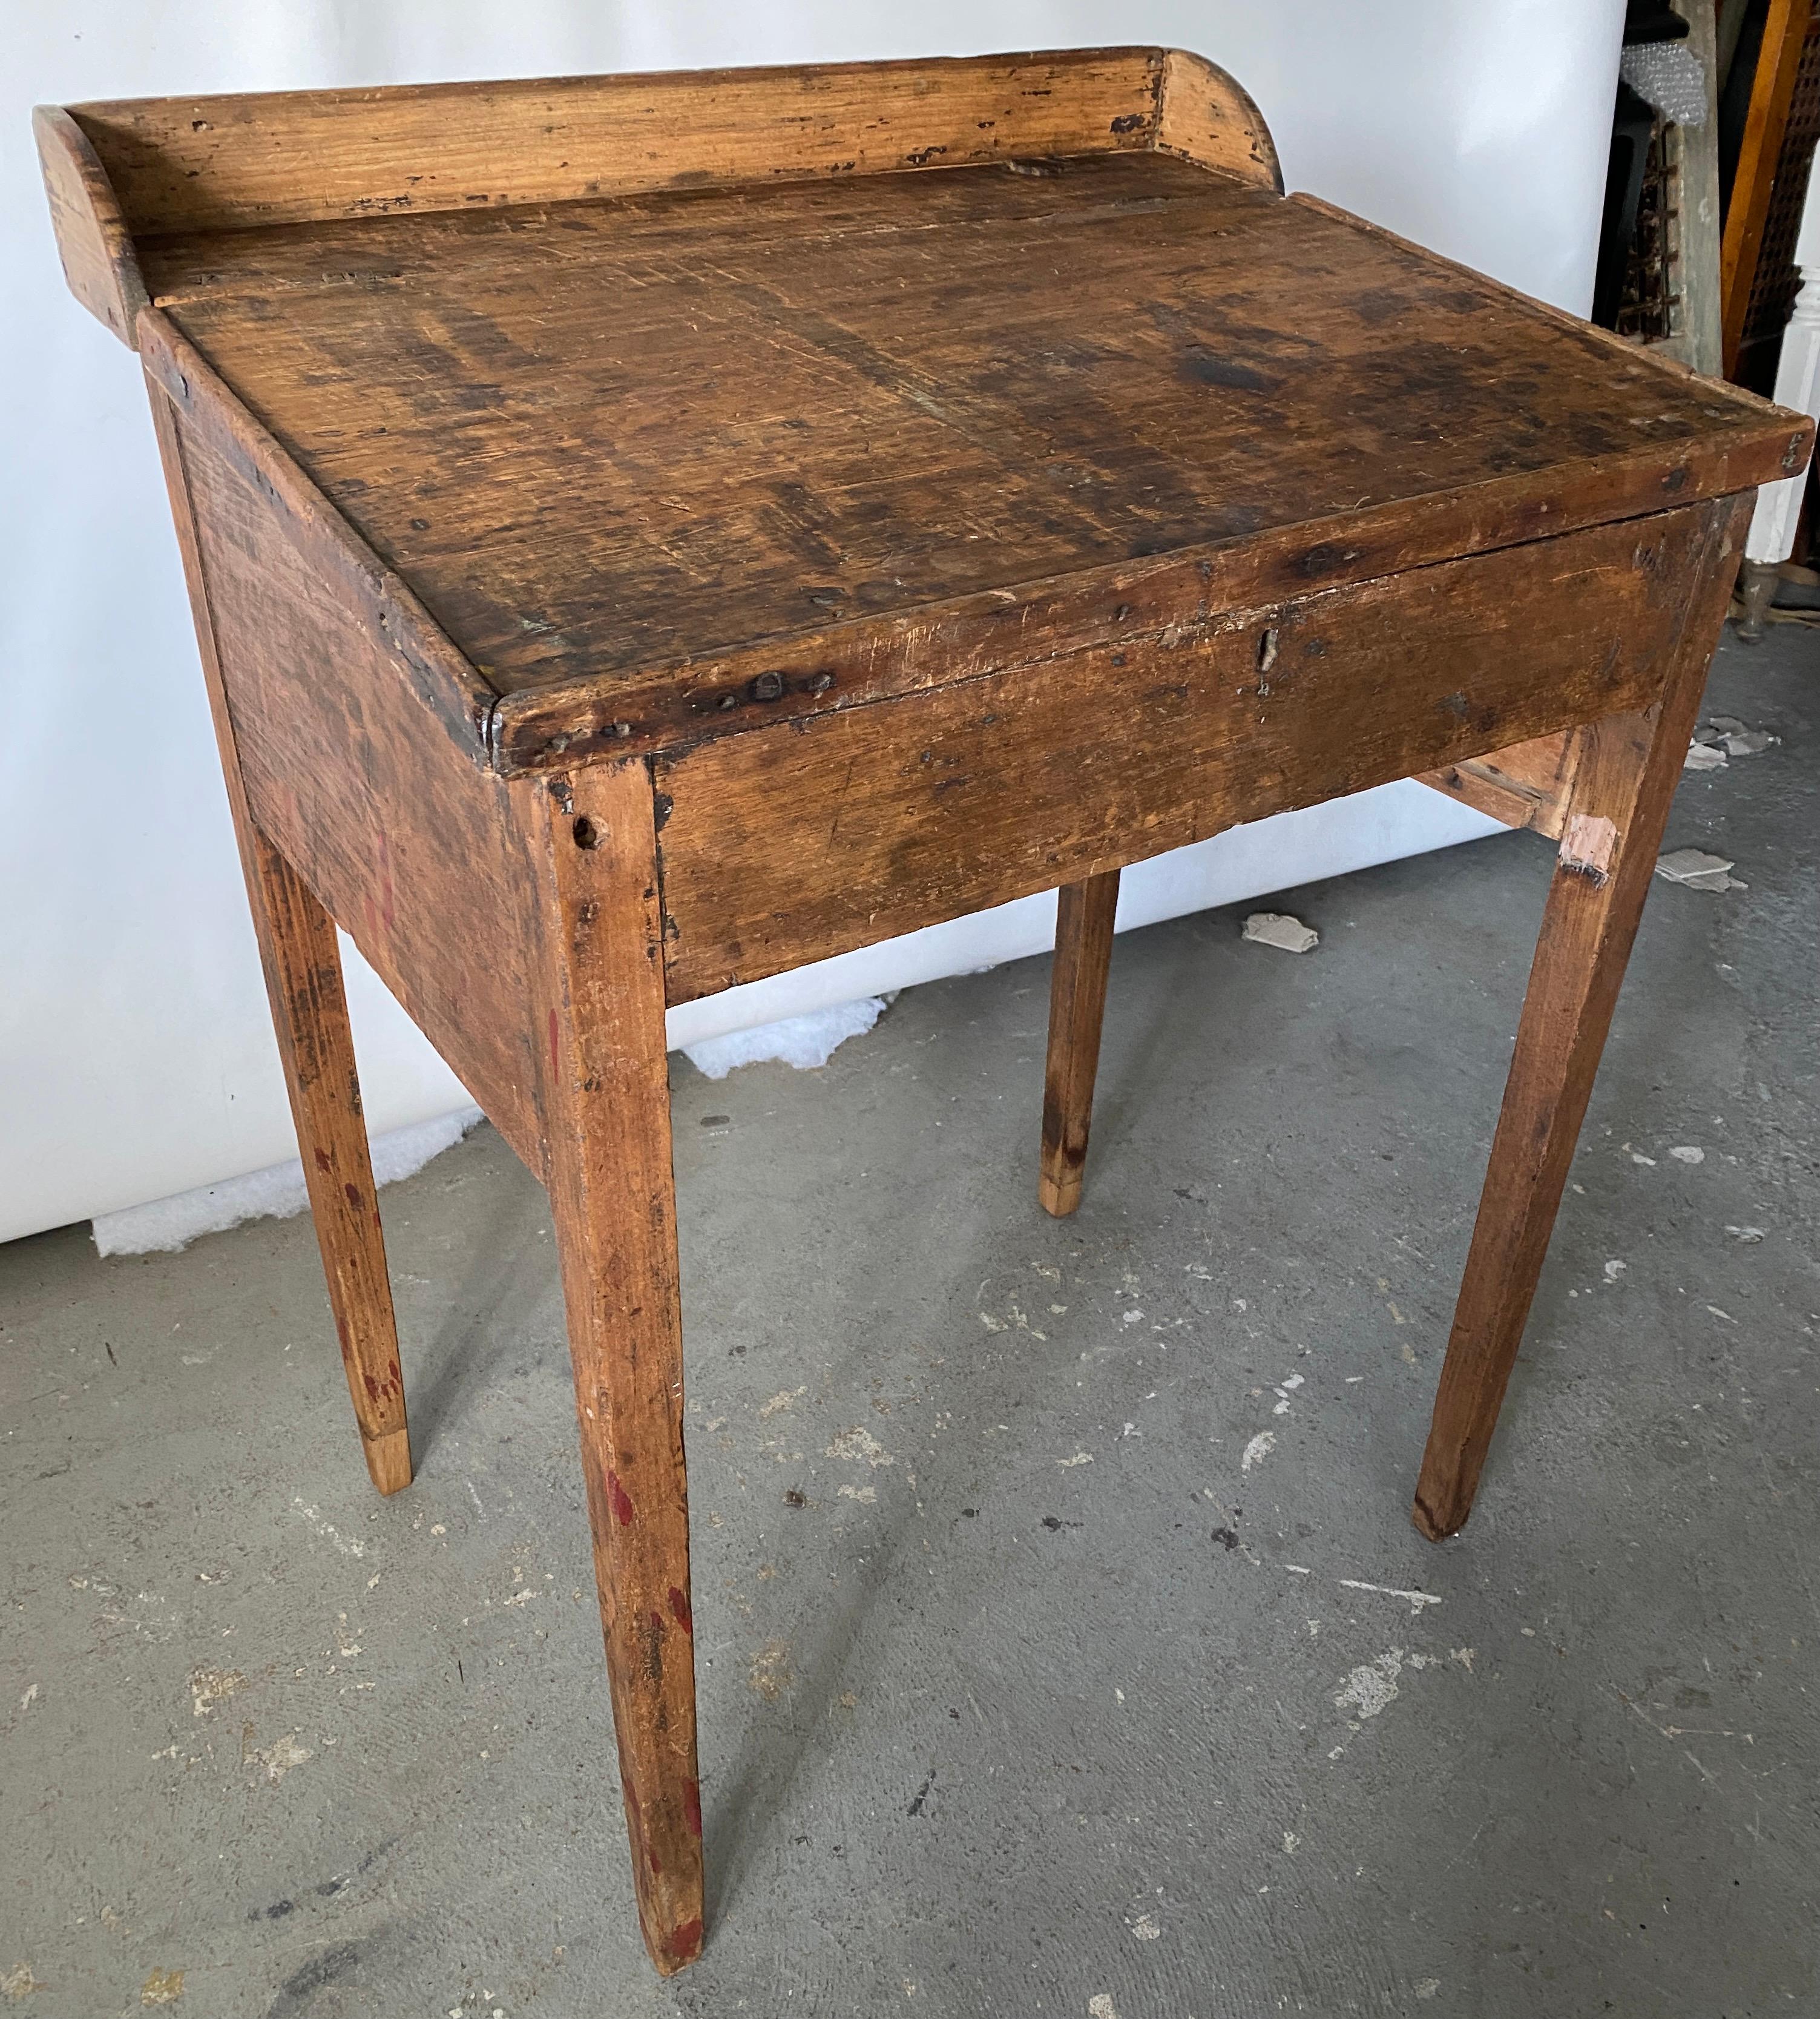 An American raise top school desk with great aged wear. Make a wonderful stand for an entry hallway, kitchen or mud room stand to hold miscellaneous keys and trinkets.
Measures: 34.5 H back.